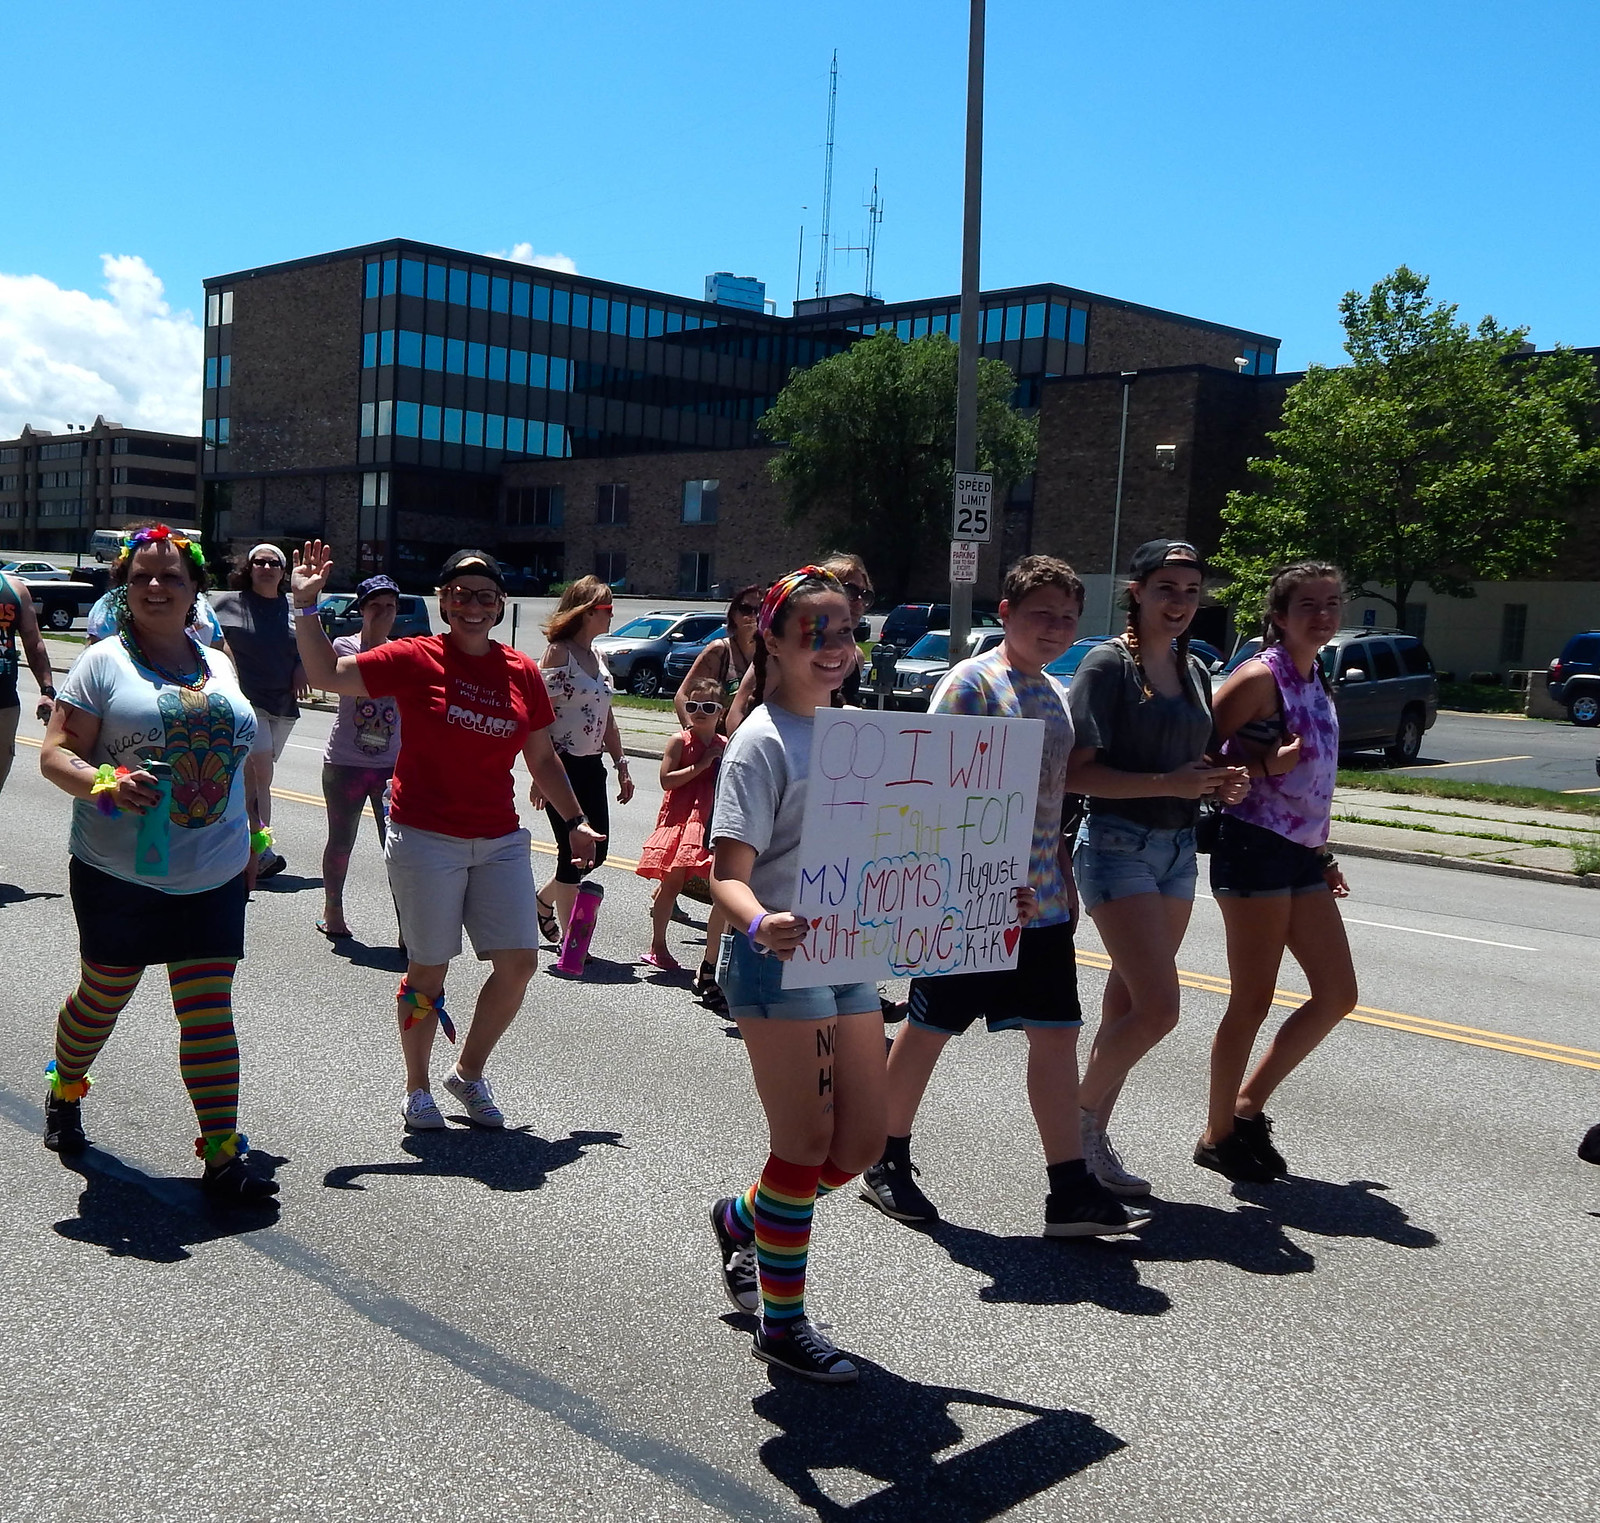 Marching in Pride Parade